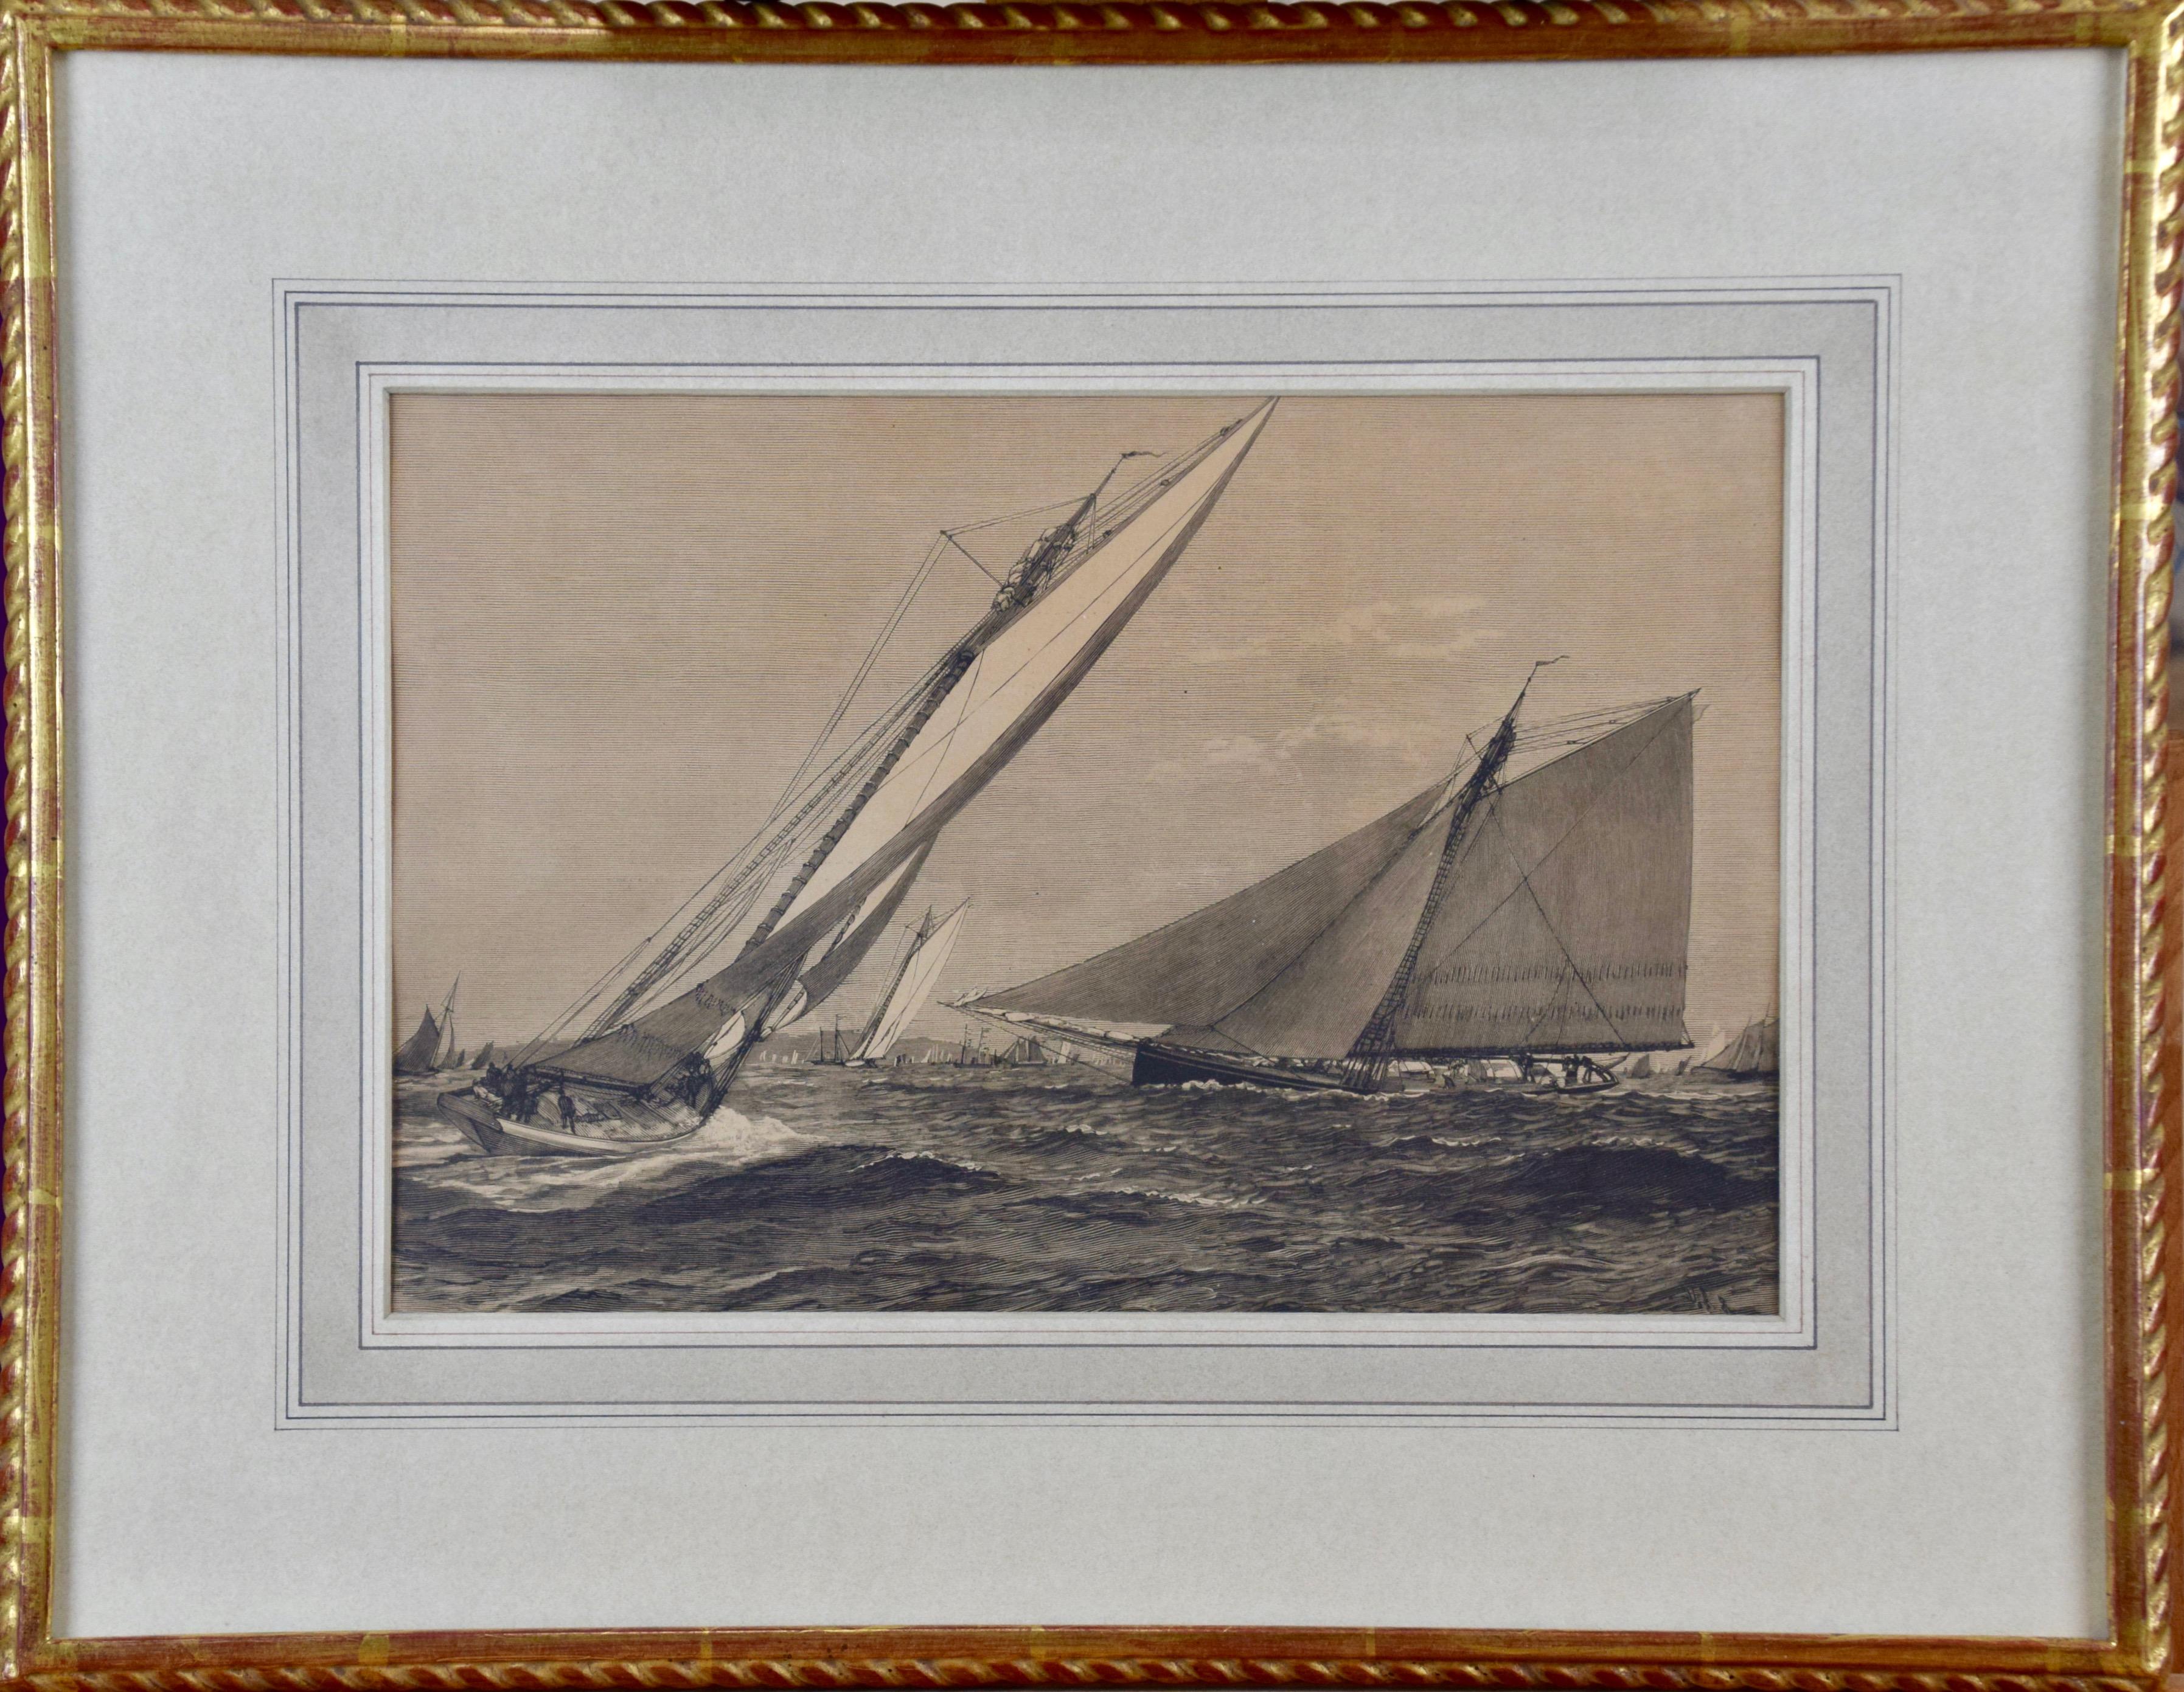 1885 America's Cup Sailing Yachts: Set of 3 Original 19th C. Engravings For Sale 7